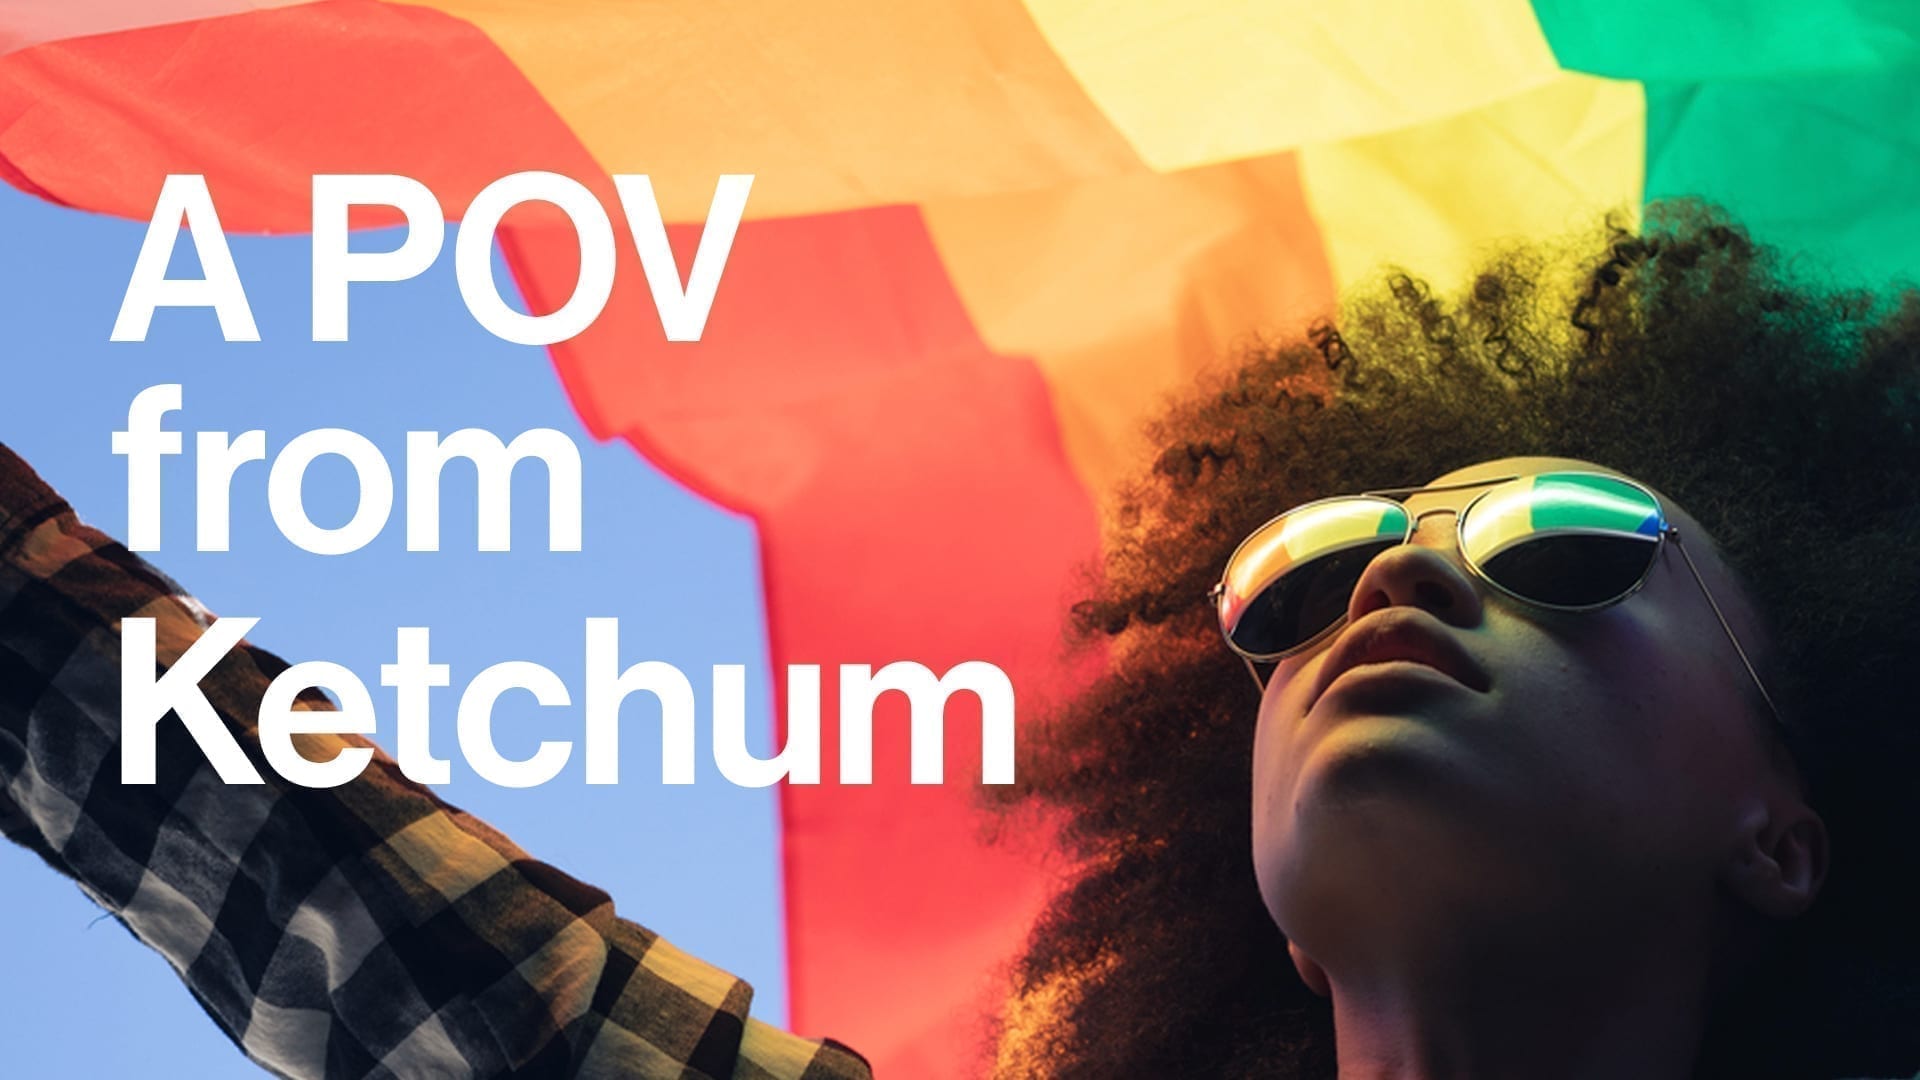 A POV from Ketchum - photo of Black woman holding pride flag over her head